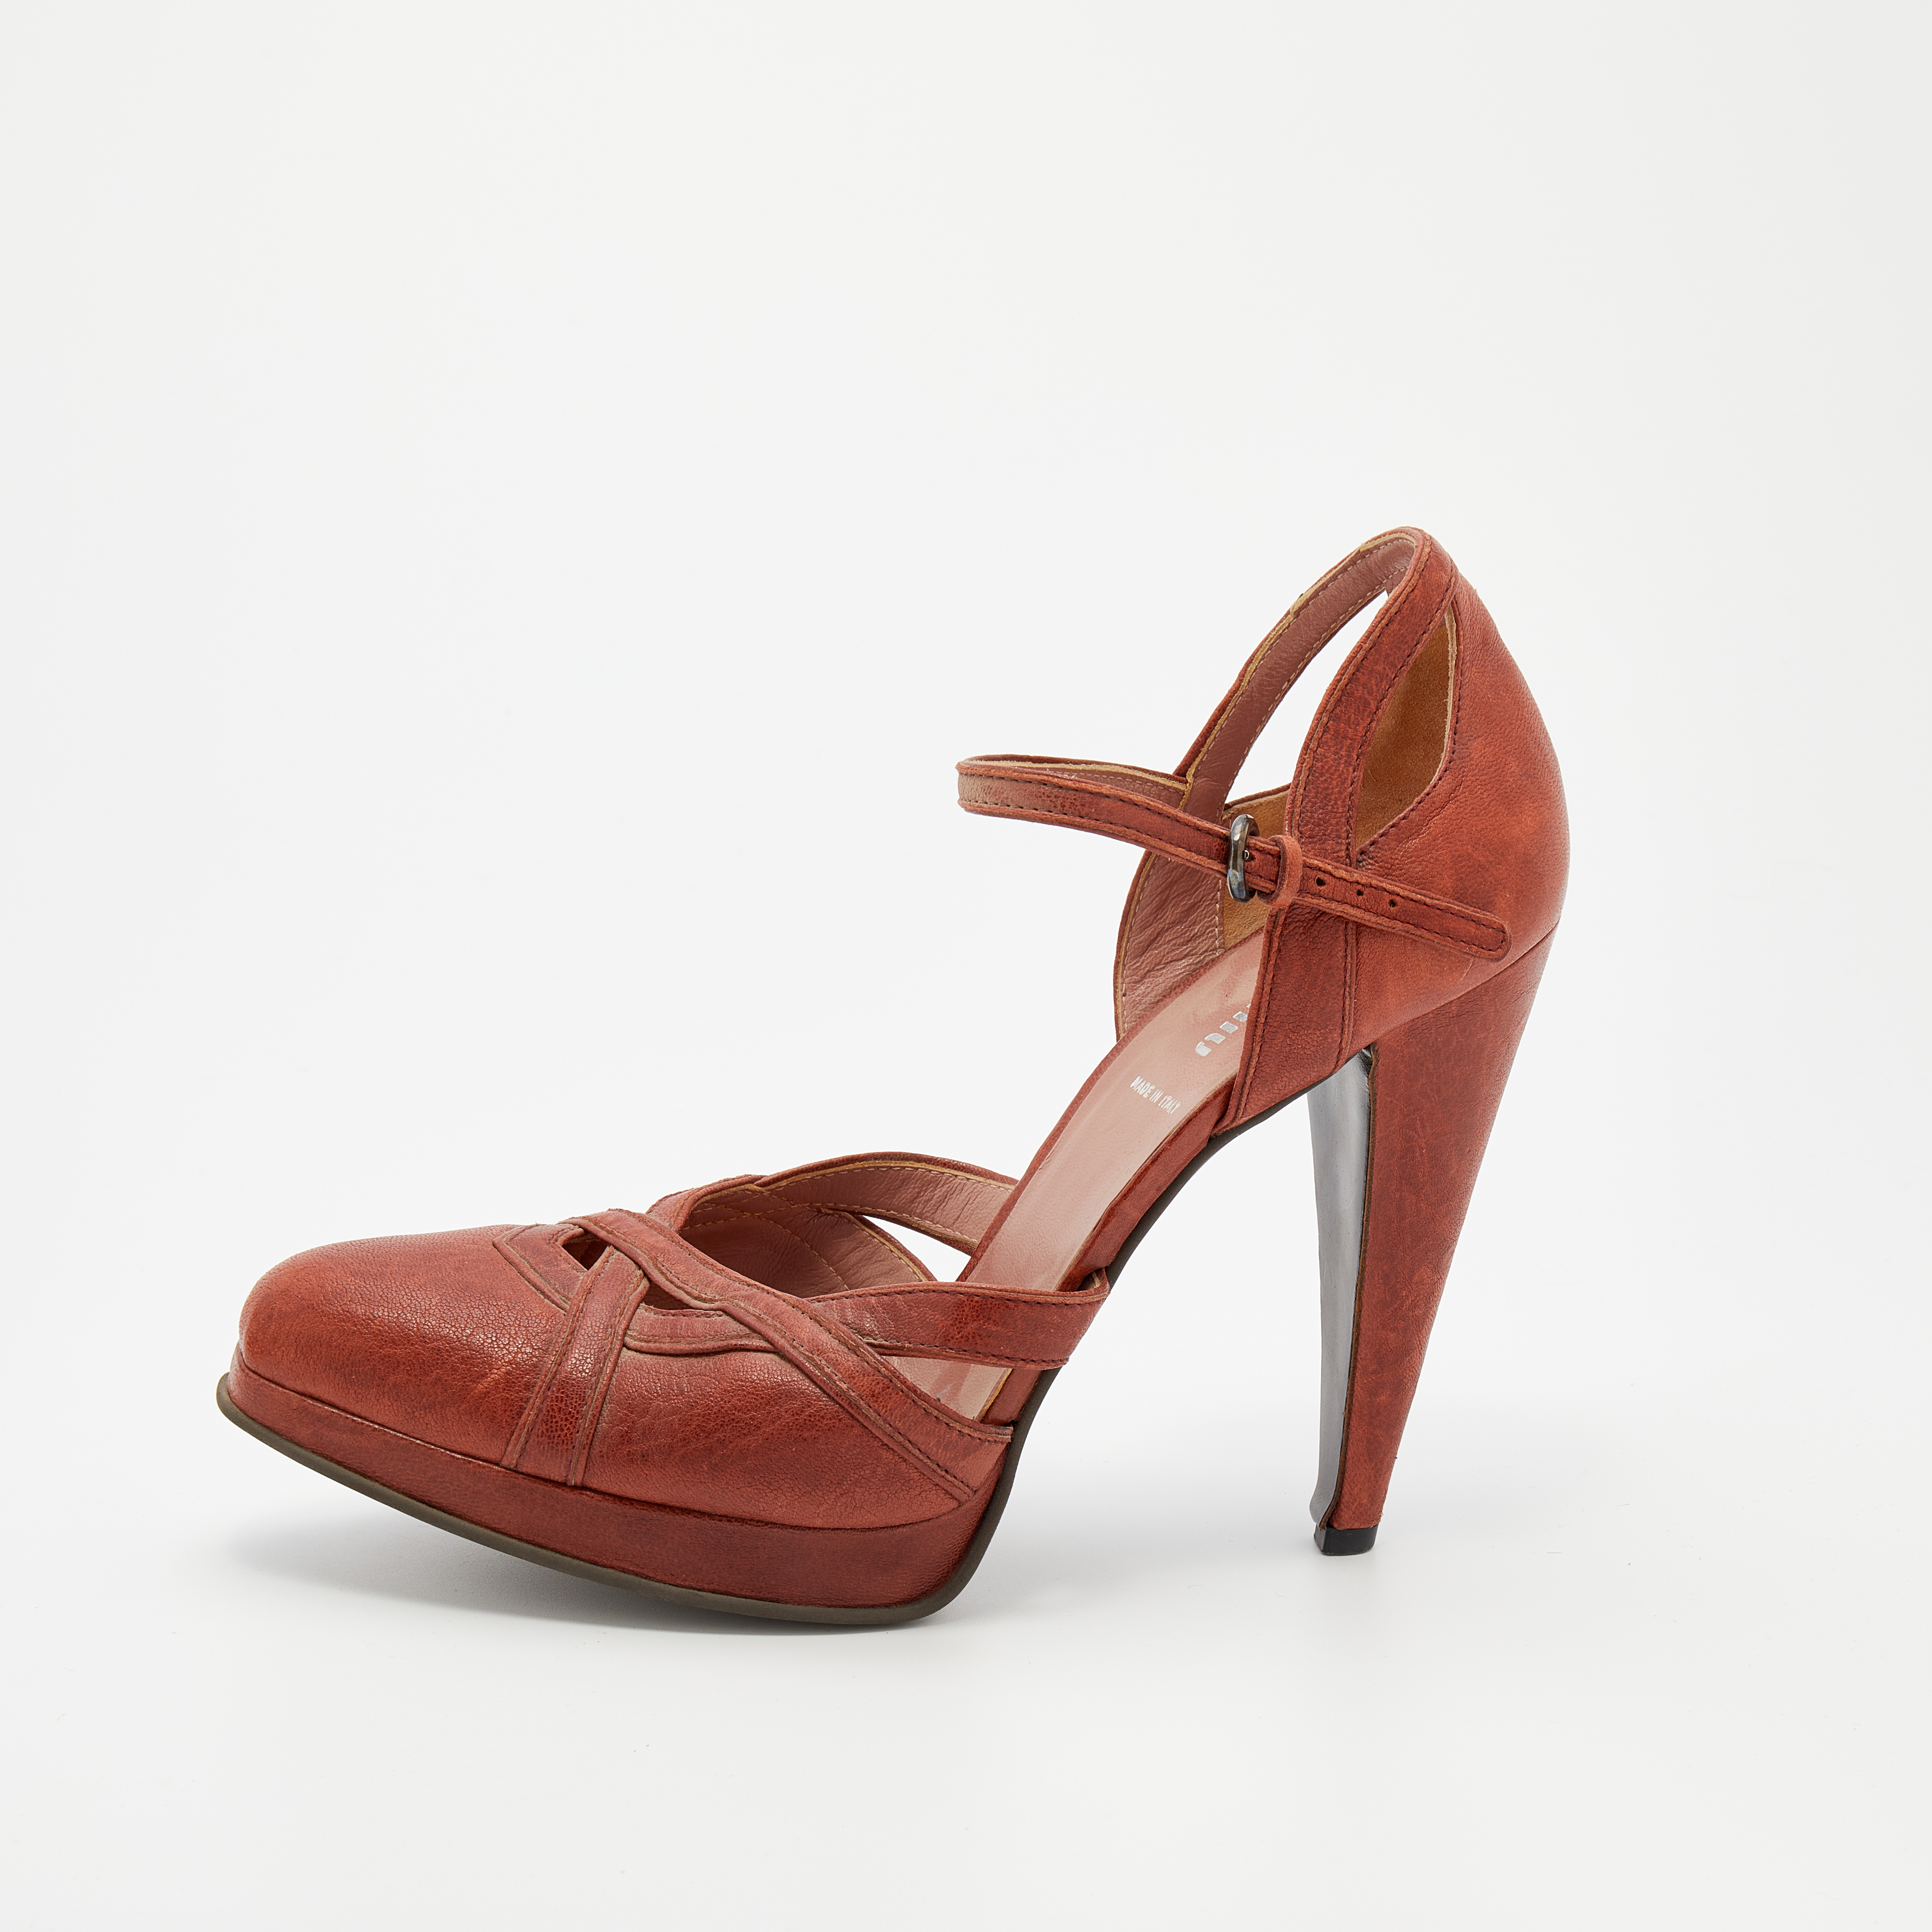 These statement platform sandals are by Miu Miu. Crafted skillfully into a modern look they are made from burnt orange hued leather in an elegant design. The sandals are complete with closed toes buckle ankle fastenings and 12.5 cm high heels. Theyll truly make for a great buy